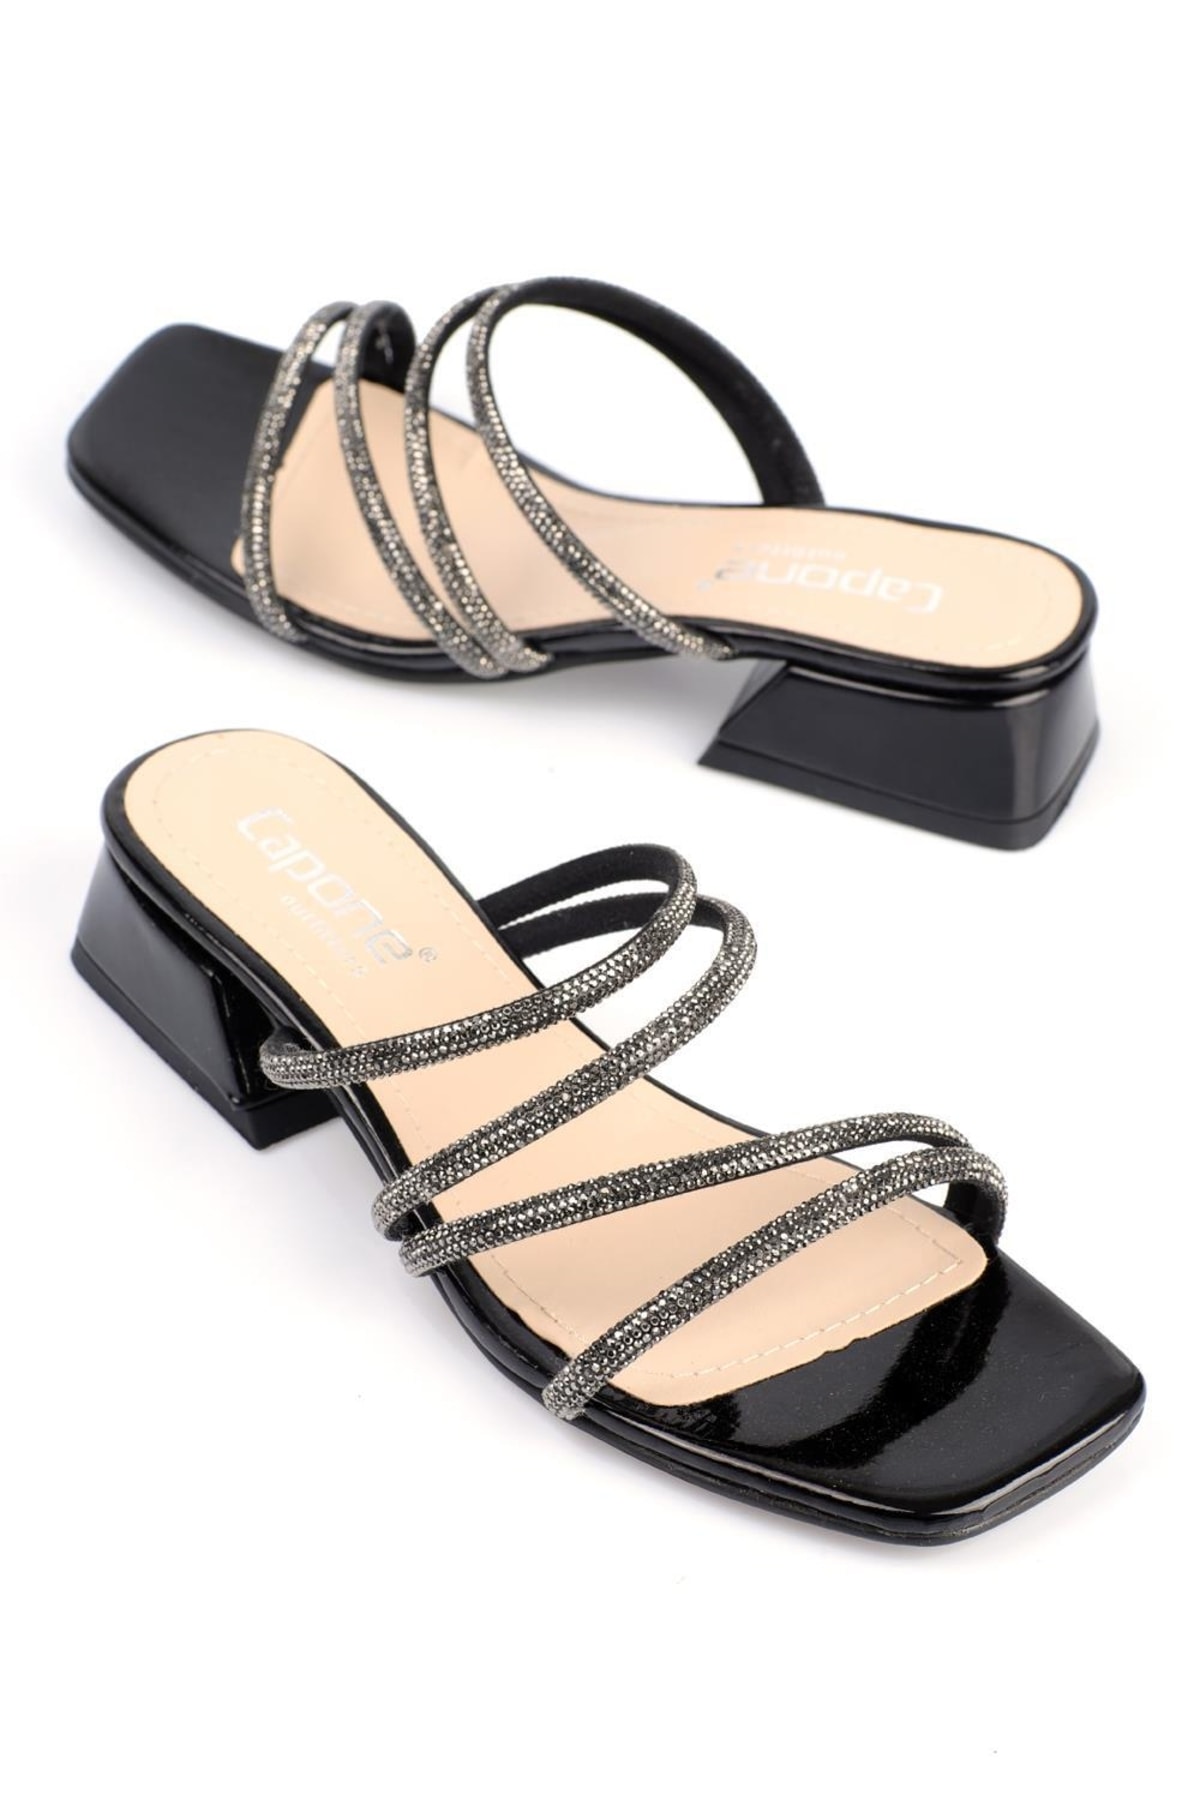 Levně Capone Outfitters Capone Flat Toe Women's Band Banded Short Heels Patent Leather Black Women's Slippers.